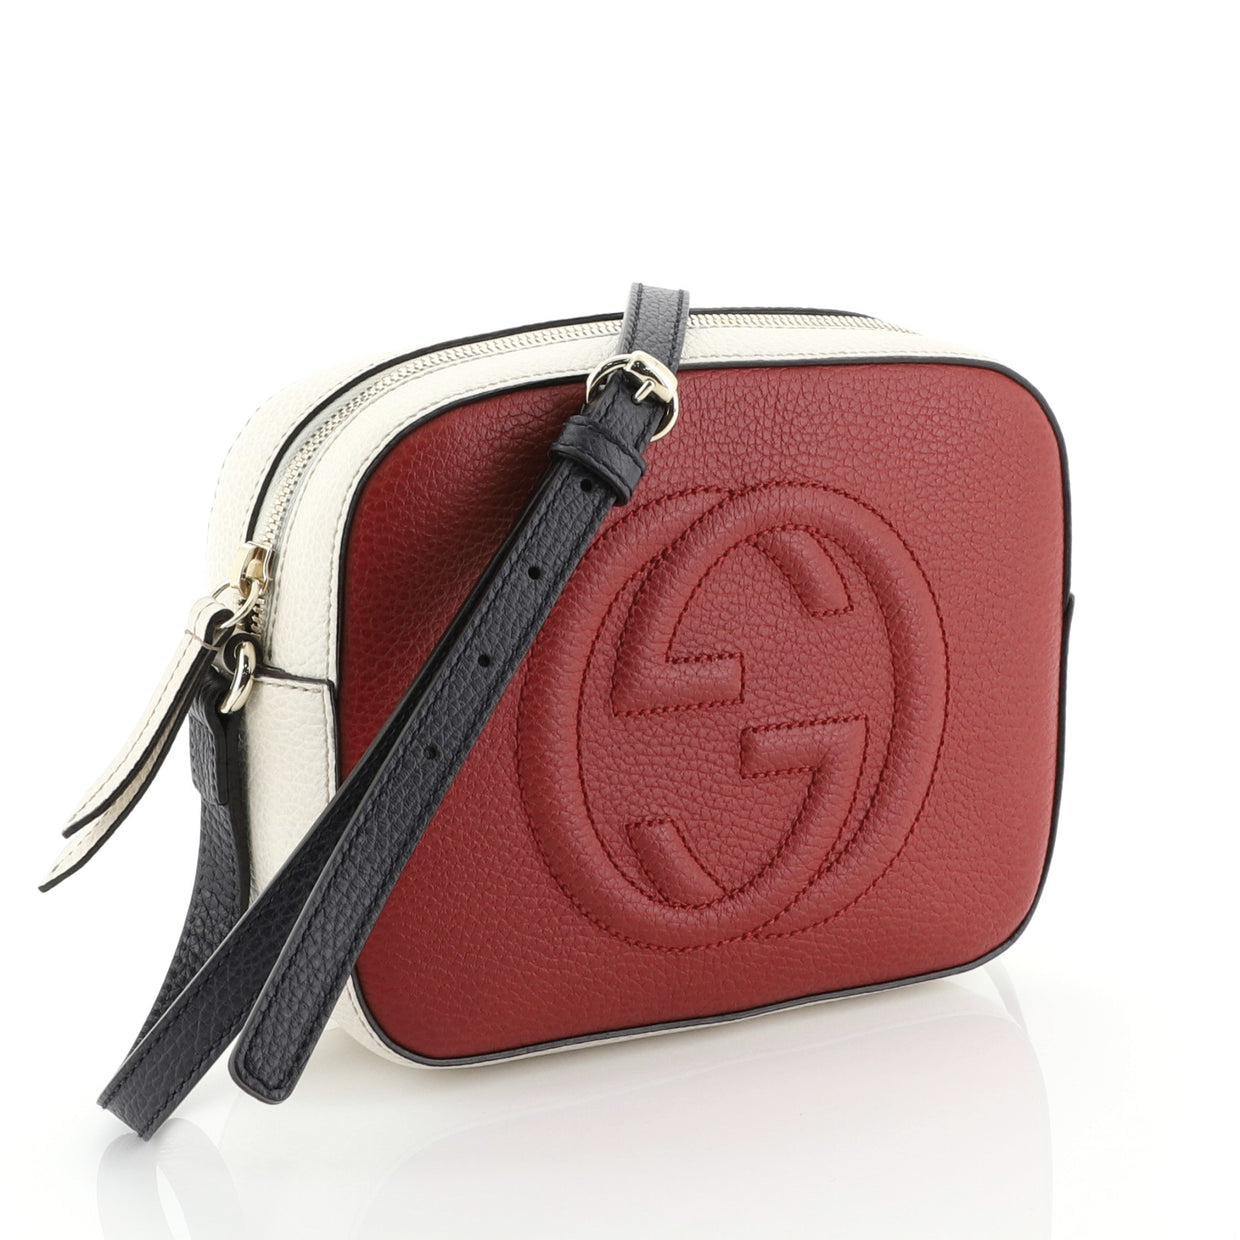 Gucci Soho Disco Crossbody Bag Leather Small Red 459165